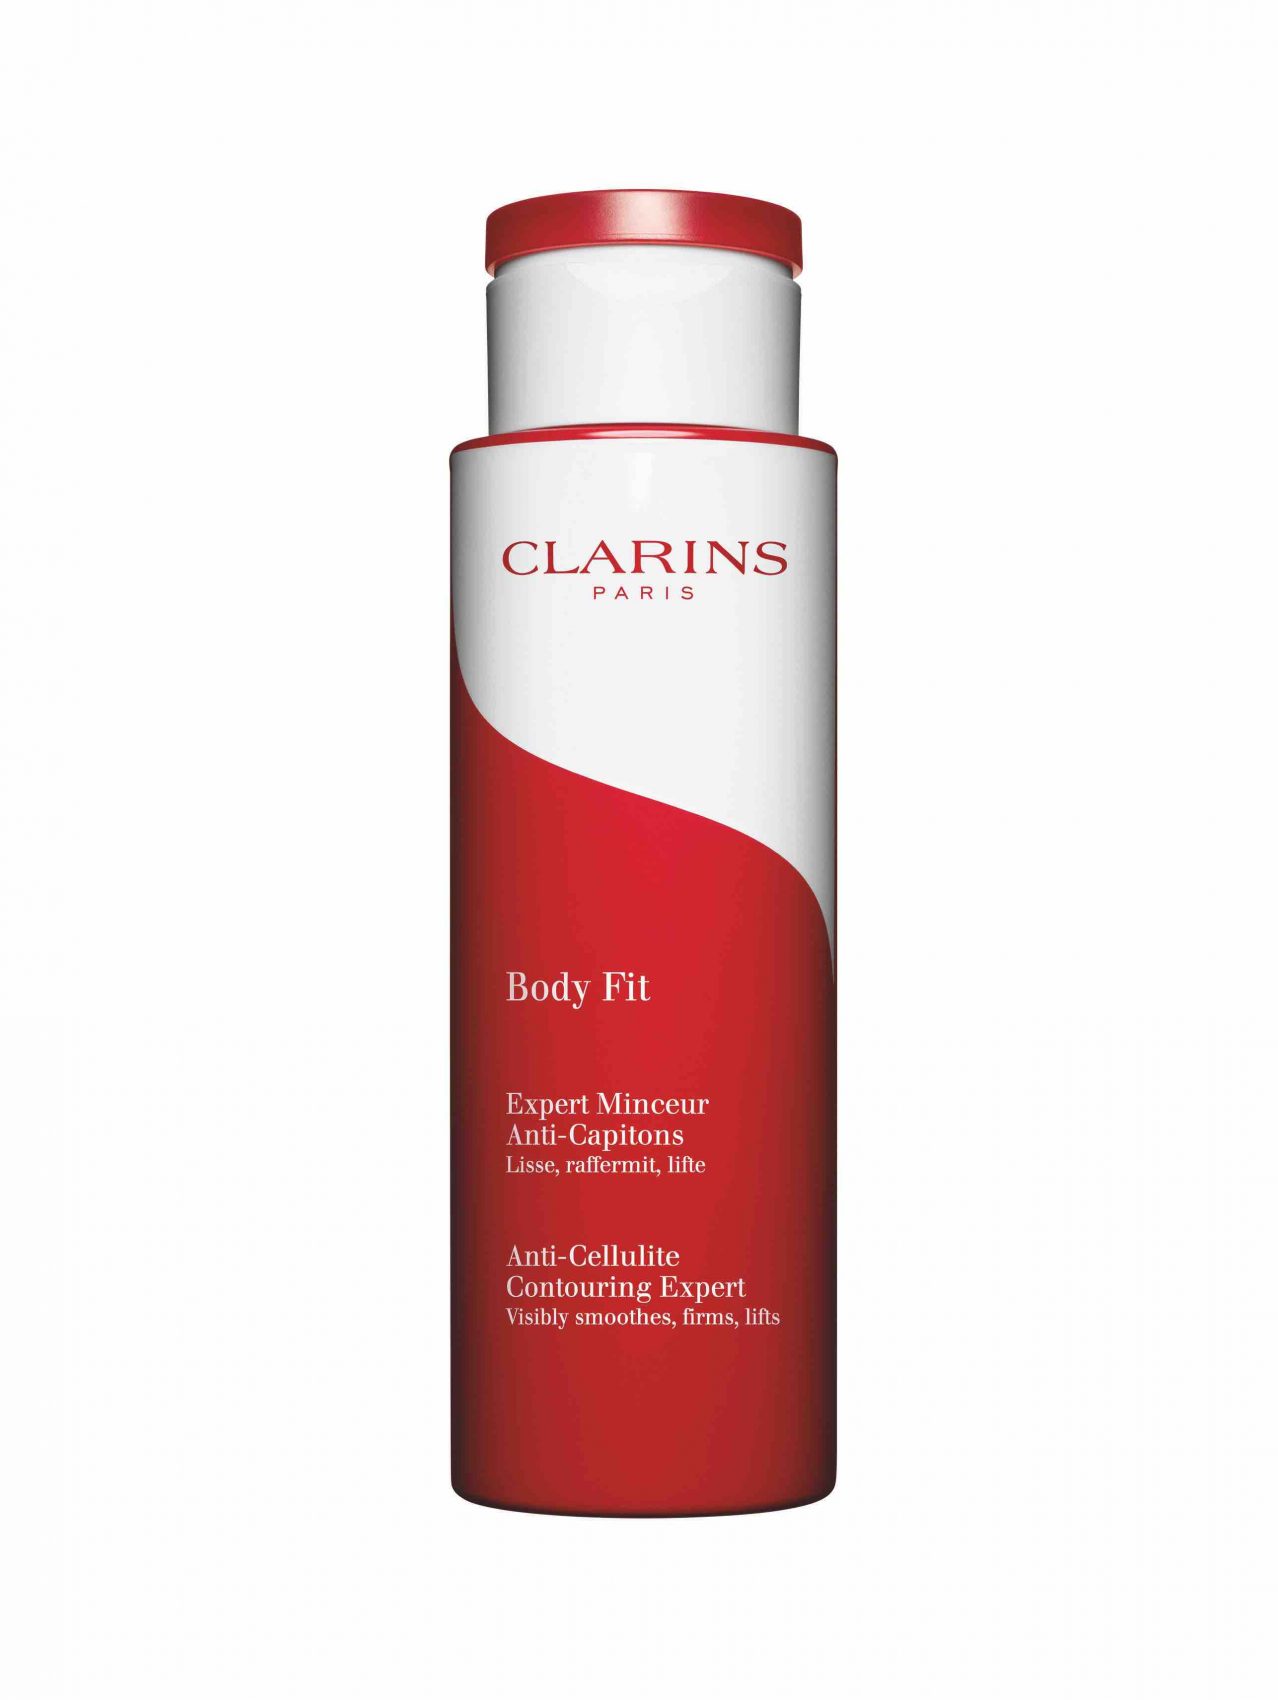 Body Contouring with CLARINS Body Fit Anti-Cellulite Contouring Expert 